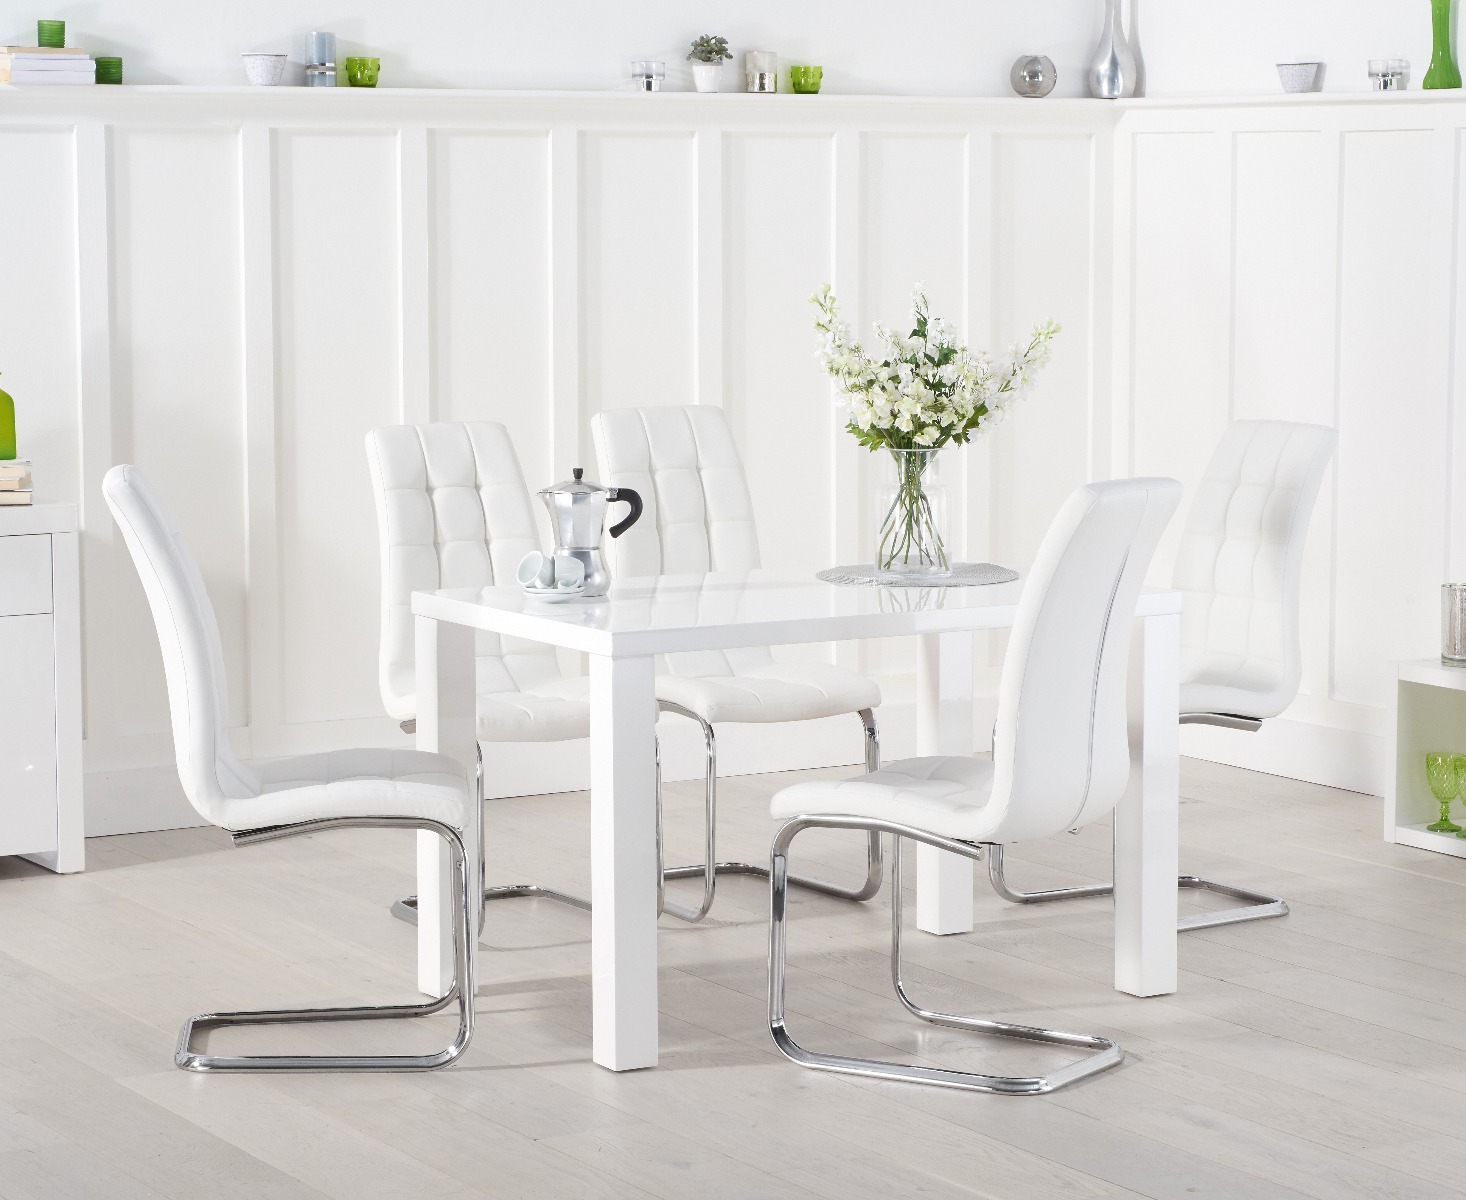 Seattle 120cm White High Gloss Dining Table With 4 Grey Vigo Chairs